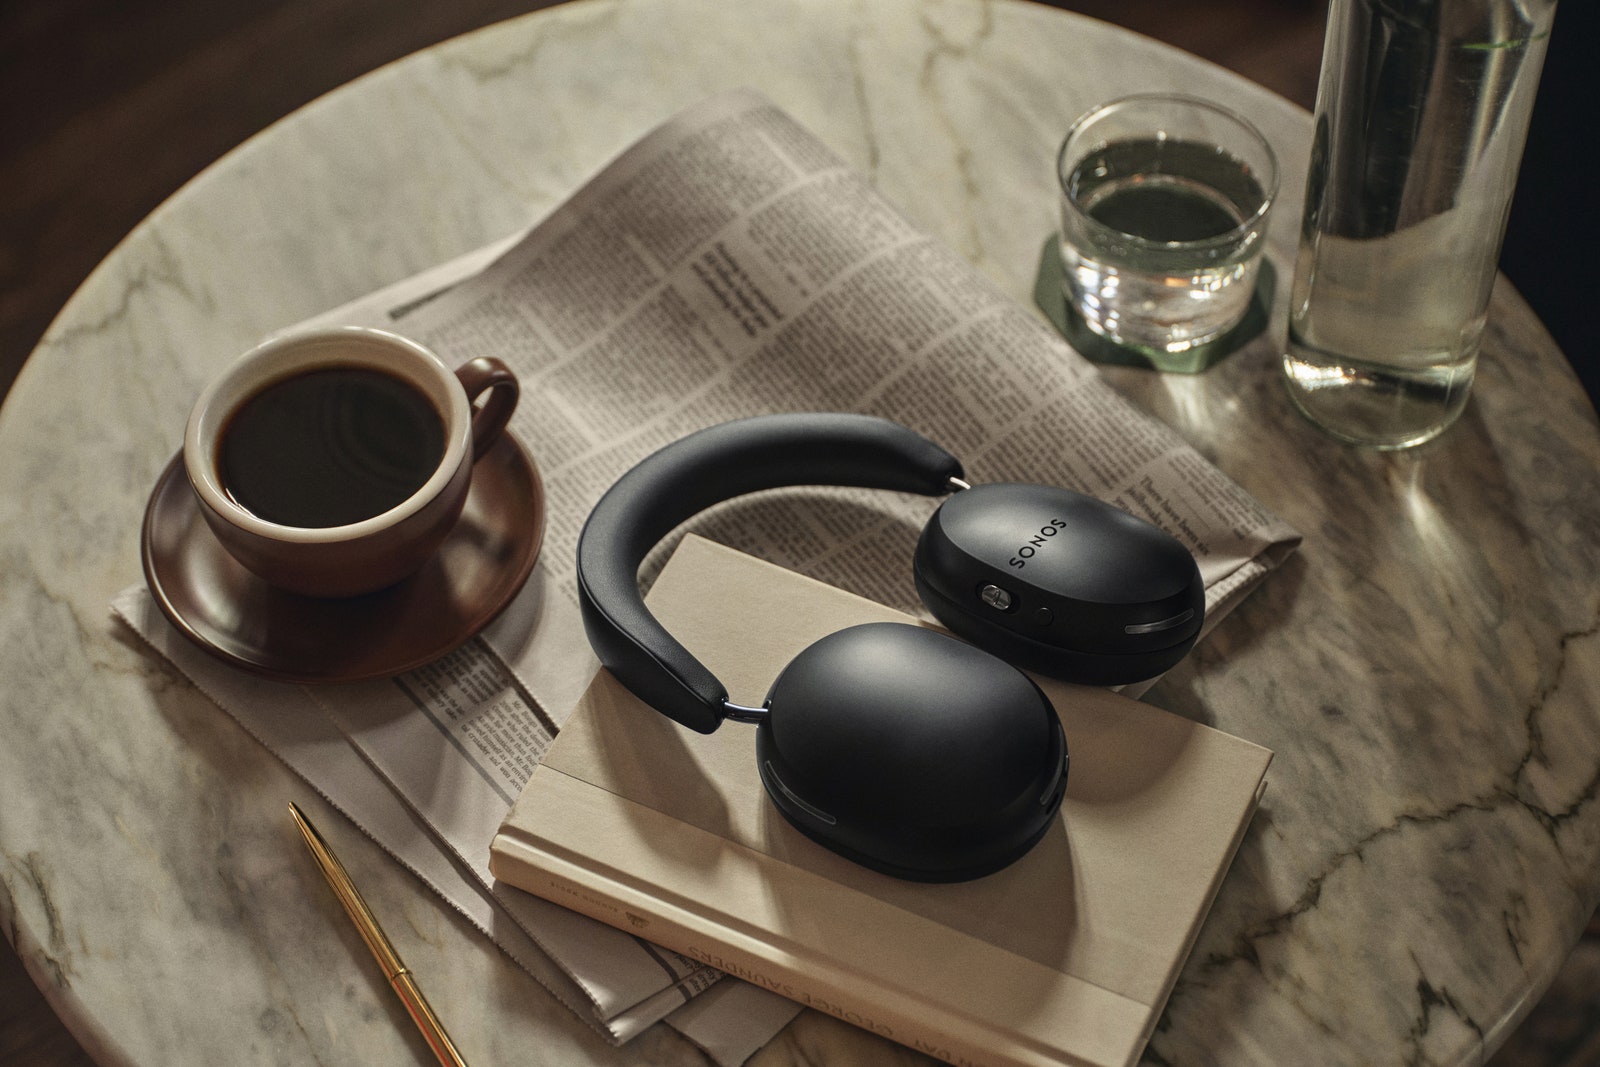 Sonos Launched Its First Pair of Headphones&-Here’s How They Stack Up Against Competitors